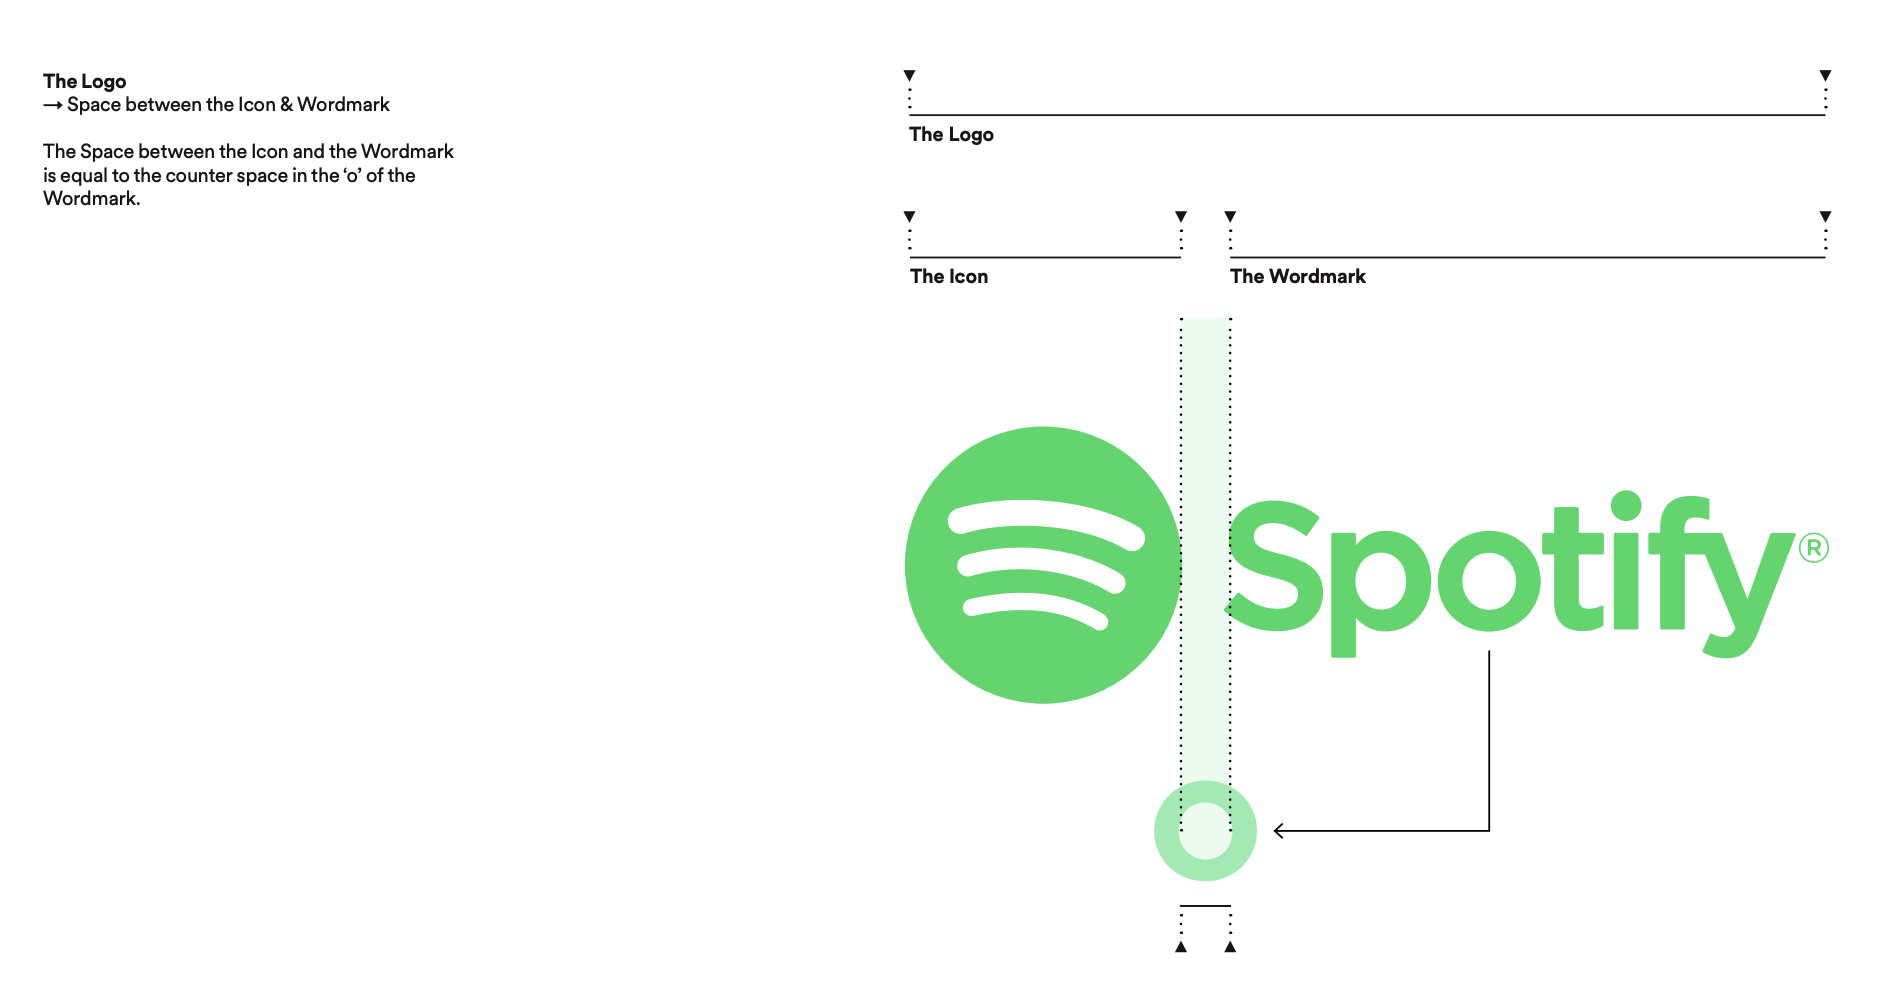 Spotify graphic charter